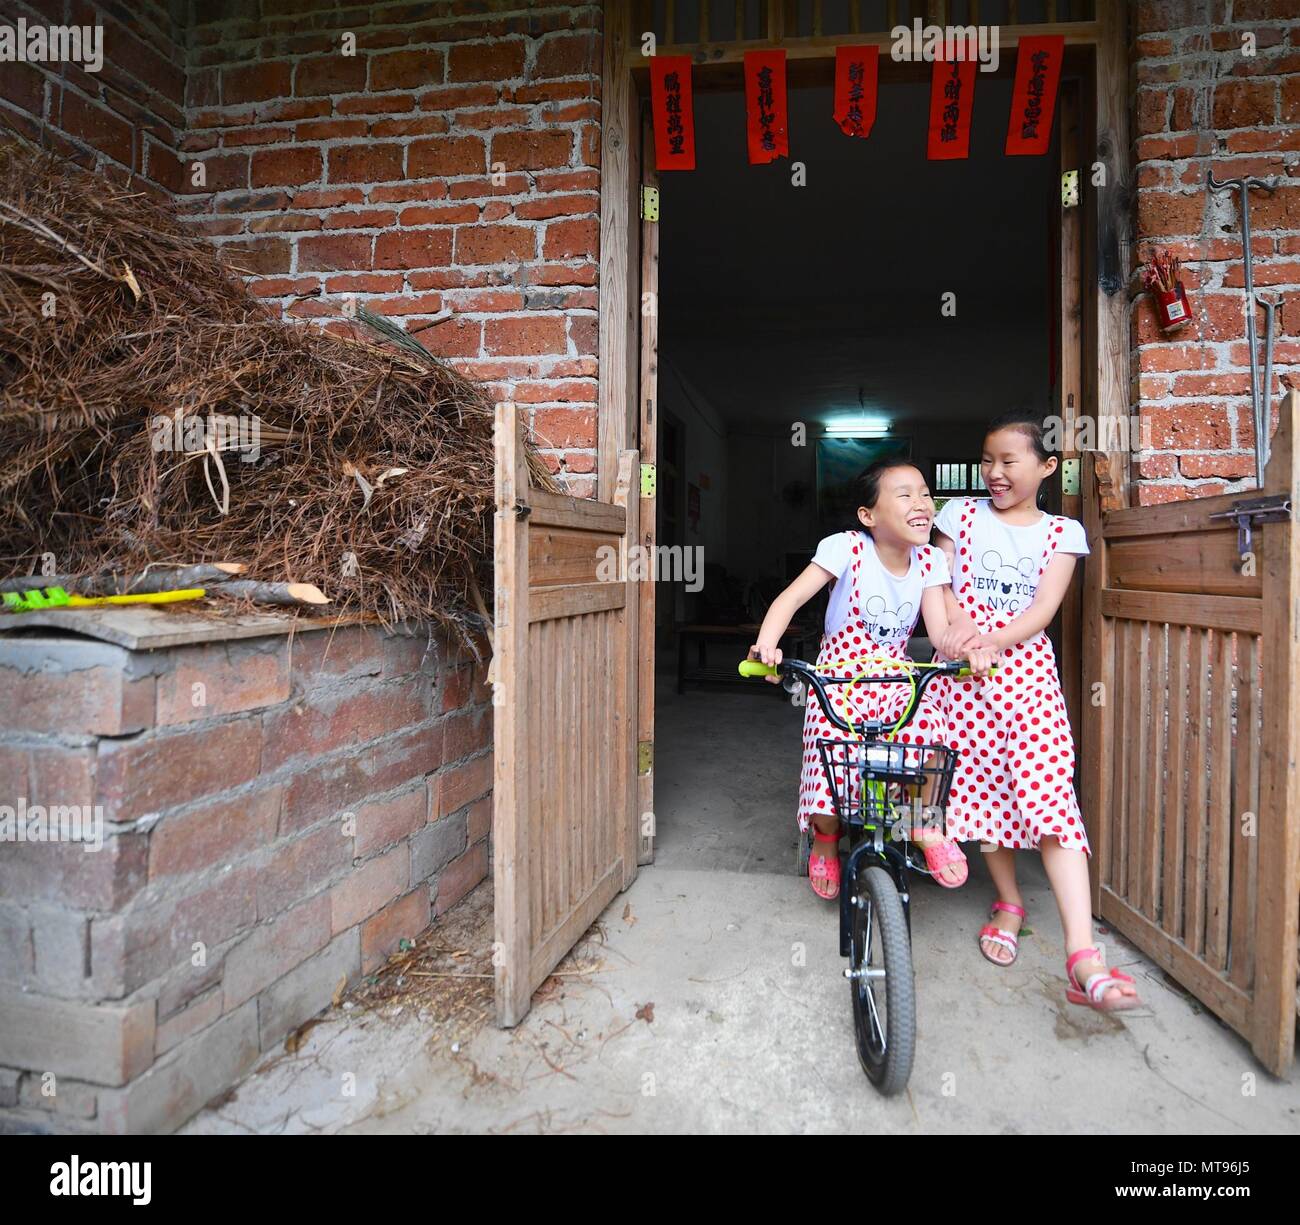 Nanchang, China's Jiangxi Province. 23rd May, 2018. Nine-year-old Zeng Jinrong (L) and her twin sister Zeng Jinyun are pictured at their home in Suolong Village of Yudu County, east China's Jiangxi Province, May 23, 2018. With about 1,000 residents, Suolong Village has 29 cases of multiple births, a high rate considering the modest population size. Credit: Hu Chenhuan/Xinhua/Alamy Live News Stock Photo